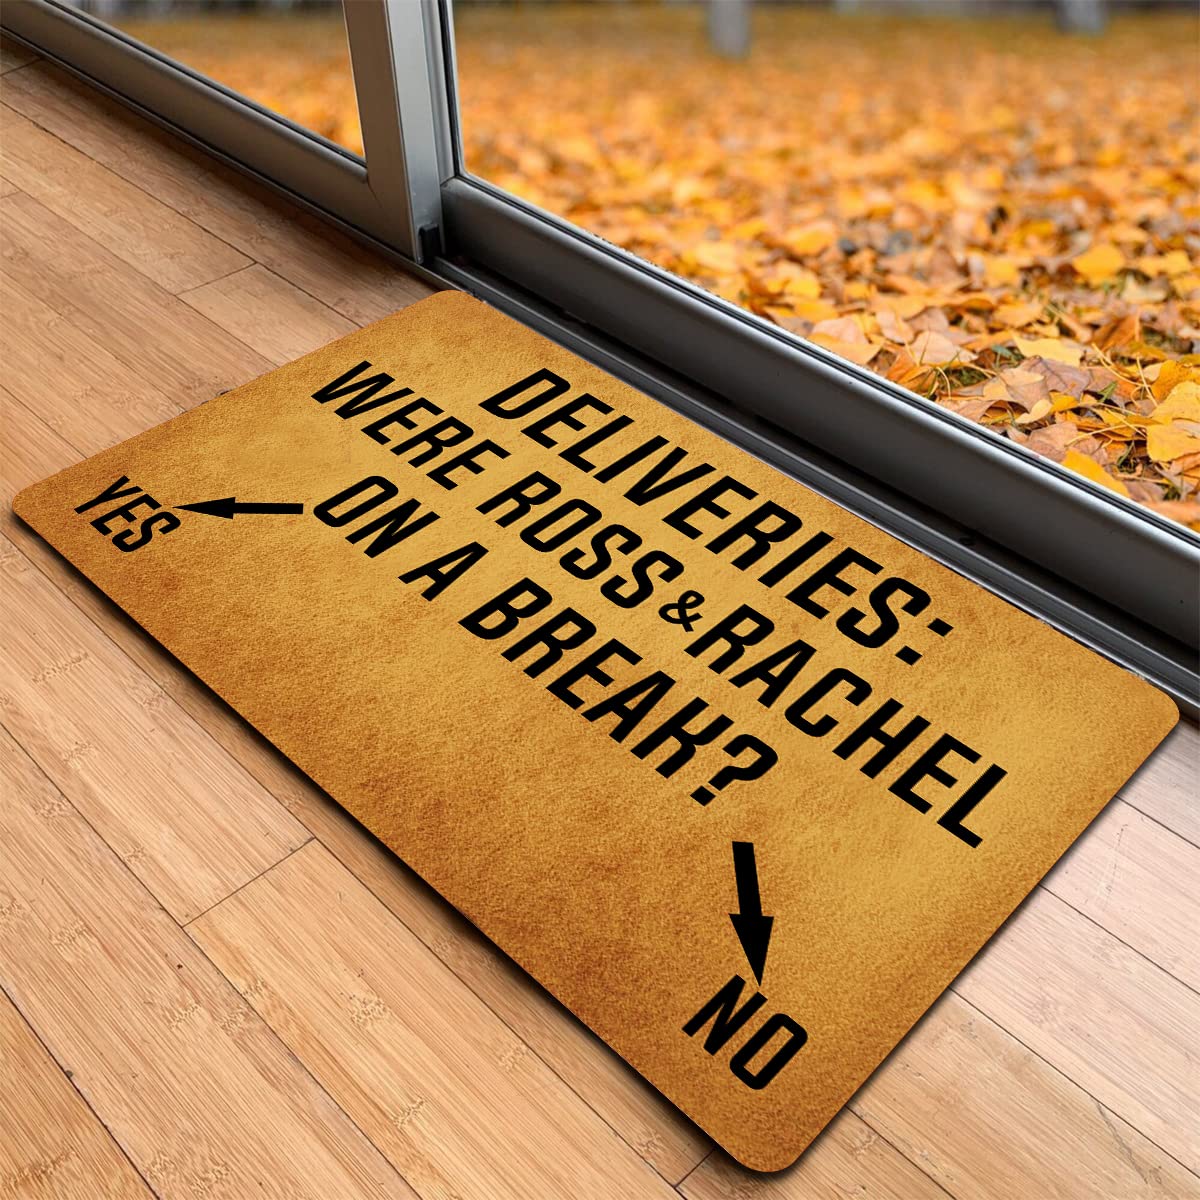 Funny Welcome Front Door Mats Indoor Entrance Rug Deliveries Were Ross And Rachel On A Break Personalized Monogram Kitchen Rugs and Mats With Anti-Slip Rubber Back Novelty Gift Mat(23.7 X 15.9 in)